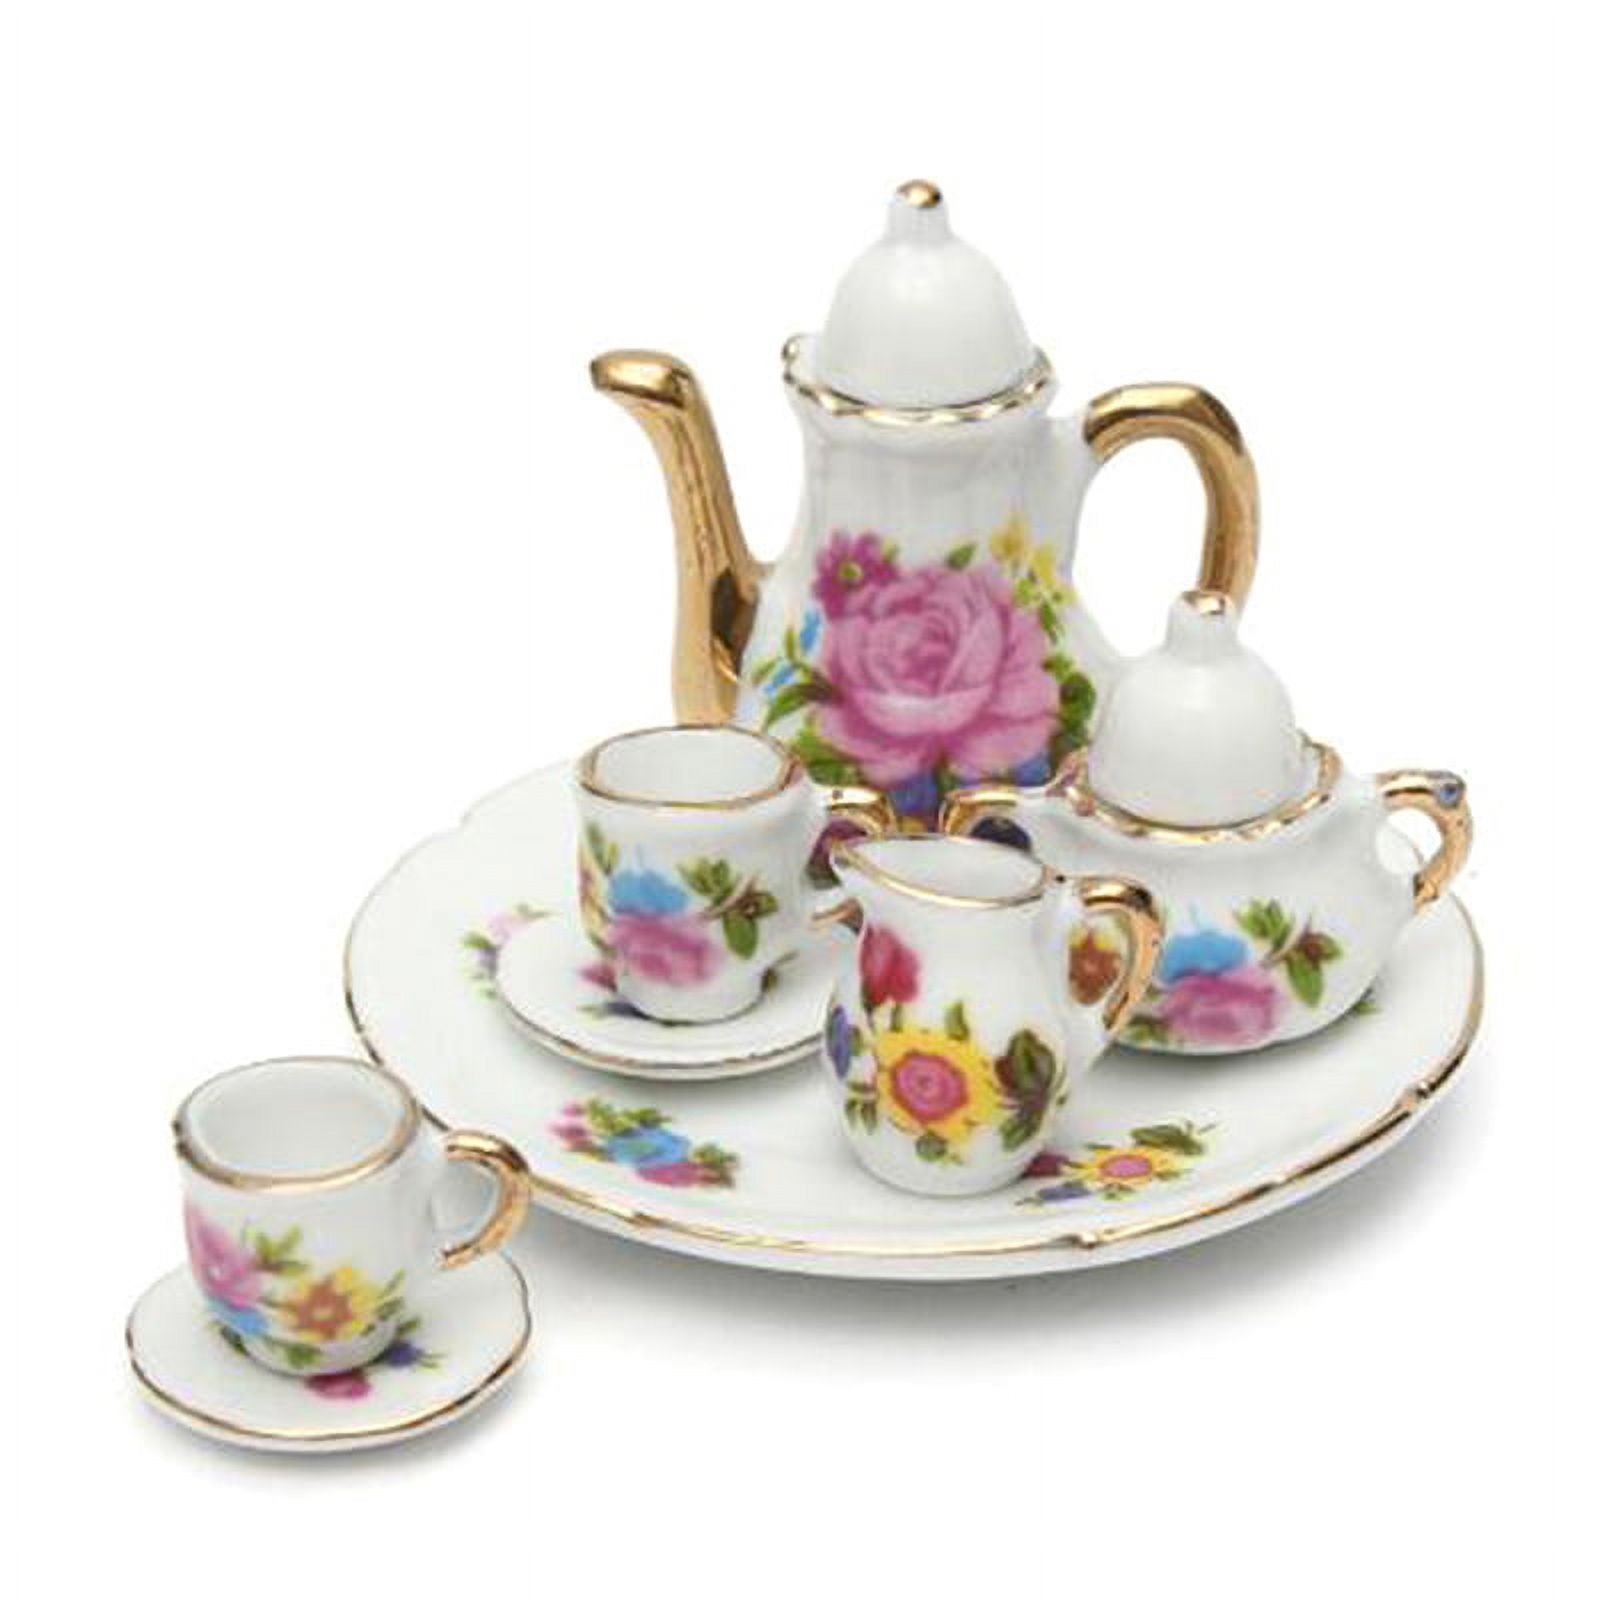 JETTINGBUY Dollhouse Miniature Dining Ware Porcelain; Tea Set Dish Cup Plate - image 1 of 4